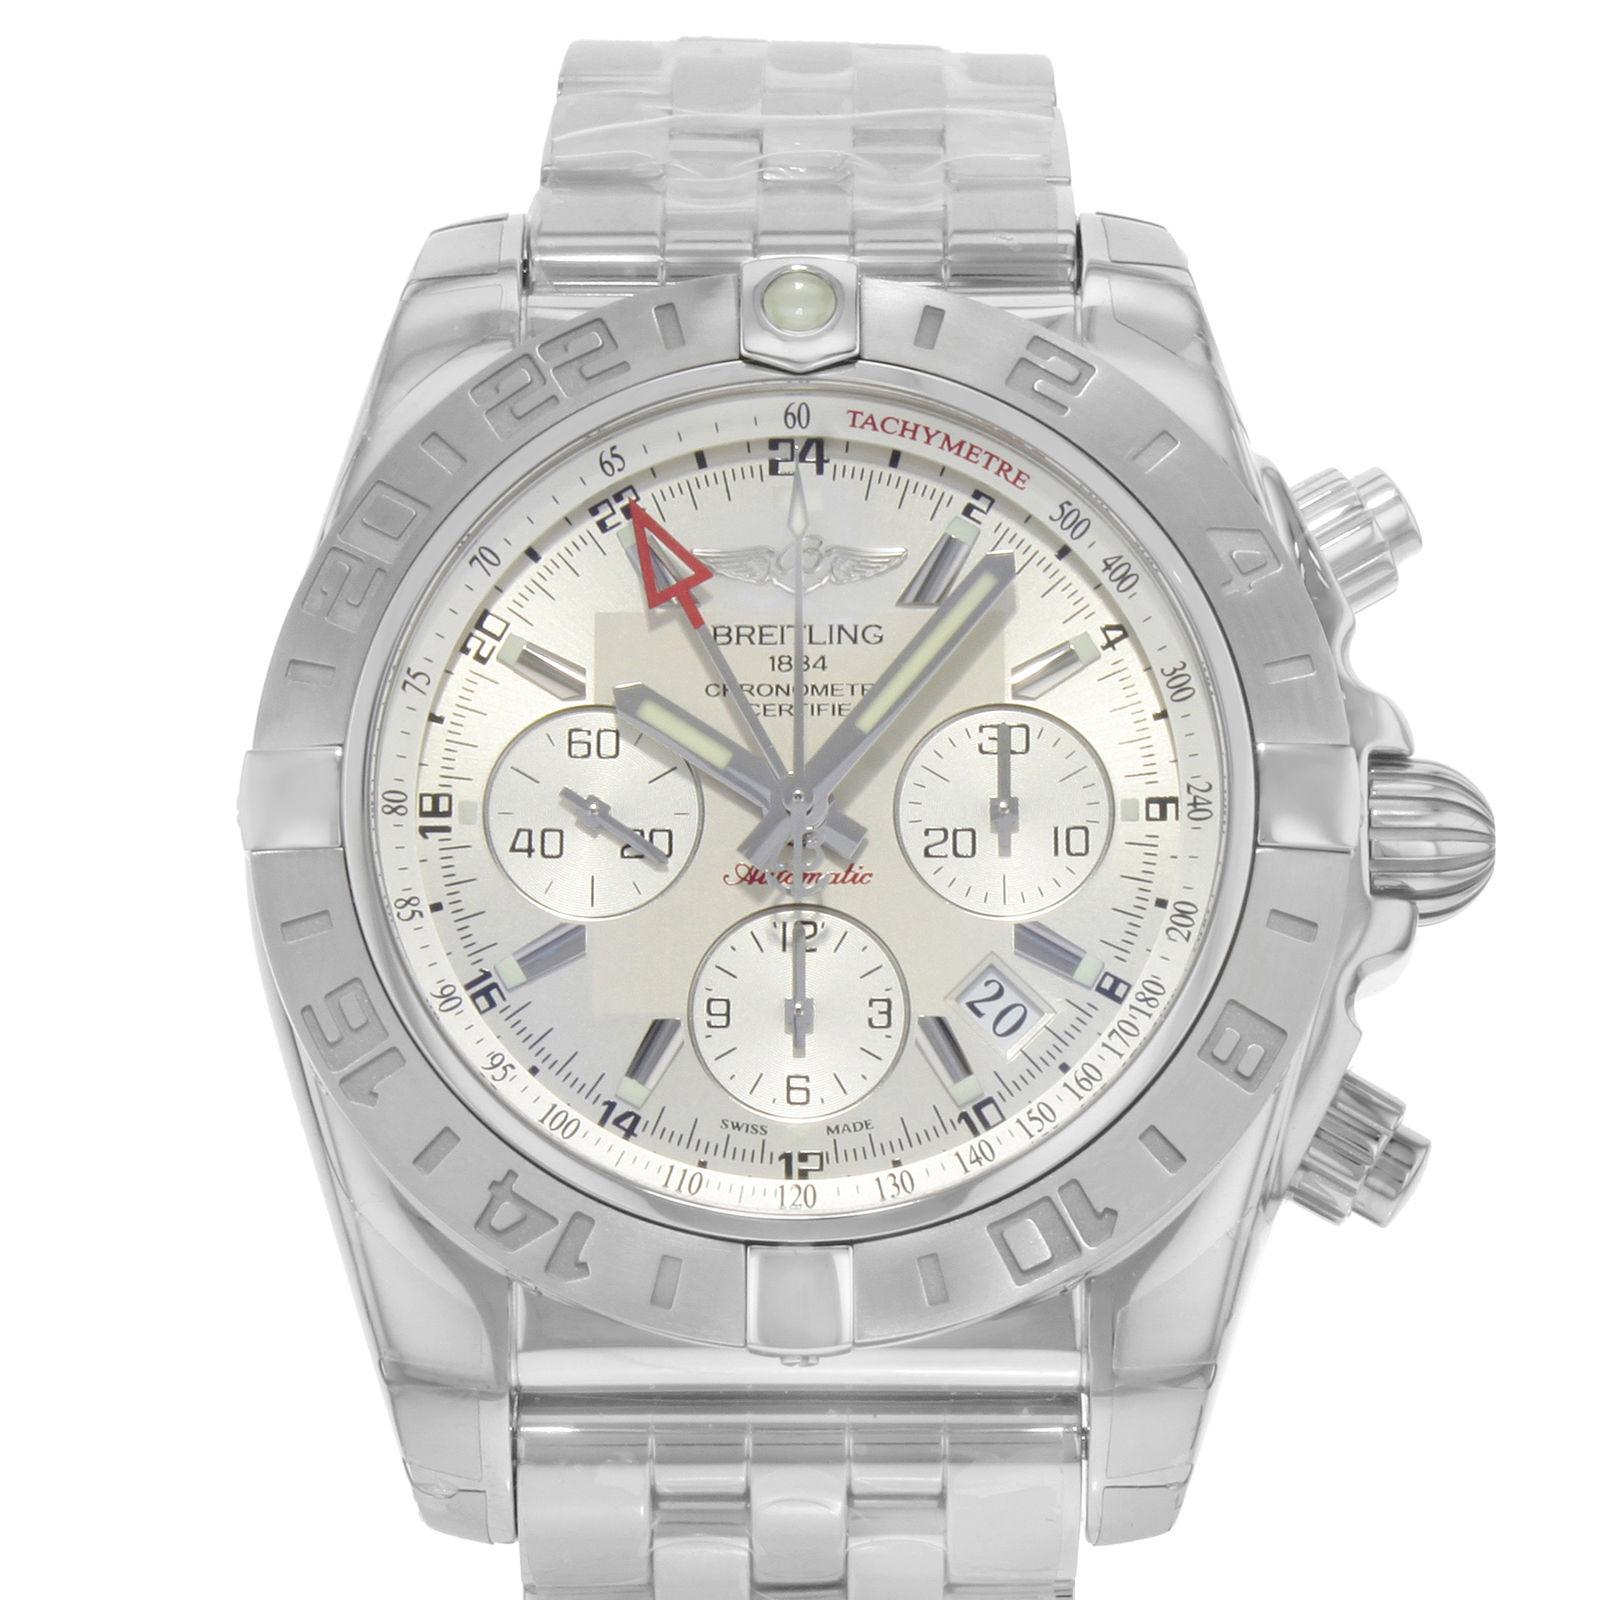 (15751)
This display model Breitling Chronomat 44 AB042011/G745-375A is a beautiful men's timepiece that is powered by an automatic movement which is cased in a stainless steel case. It has a round shape face, chronograph, date, small seconds